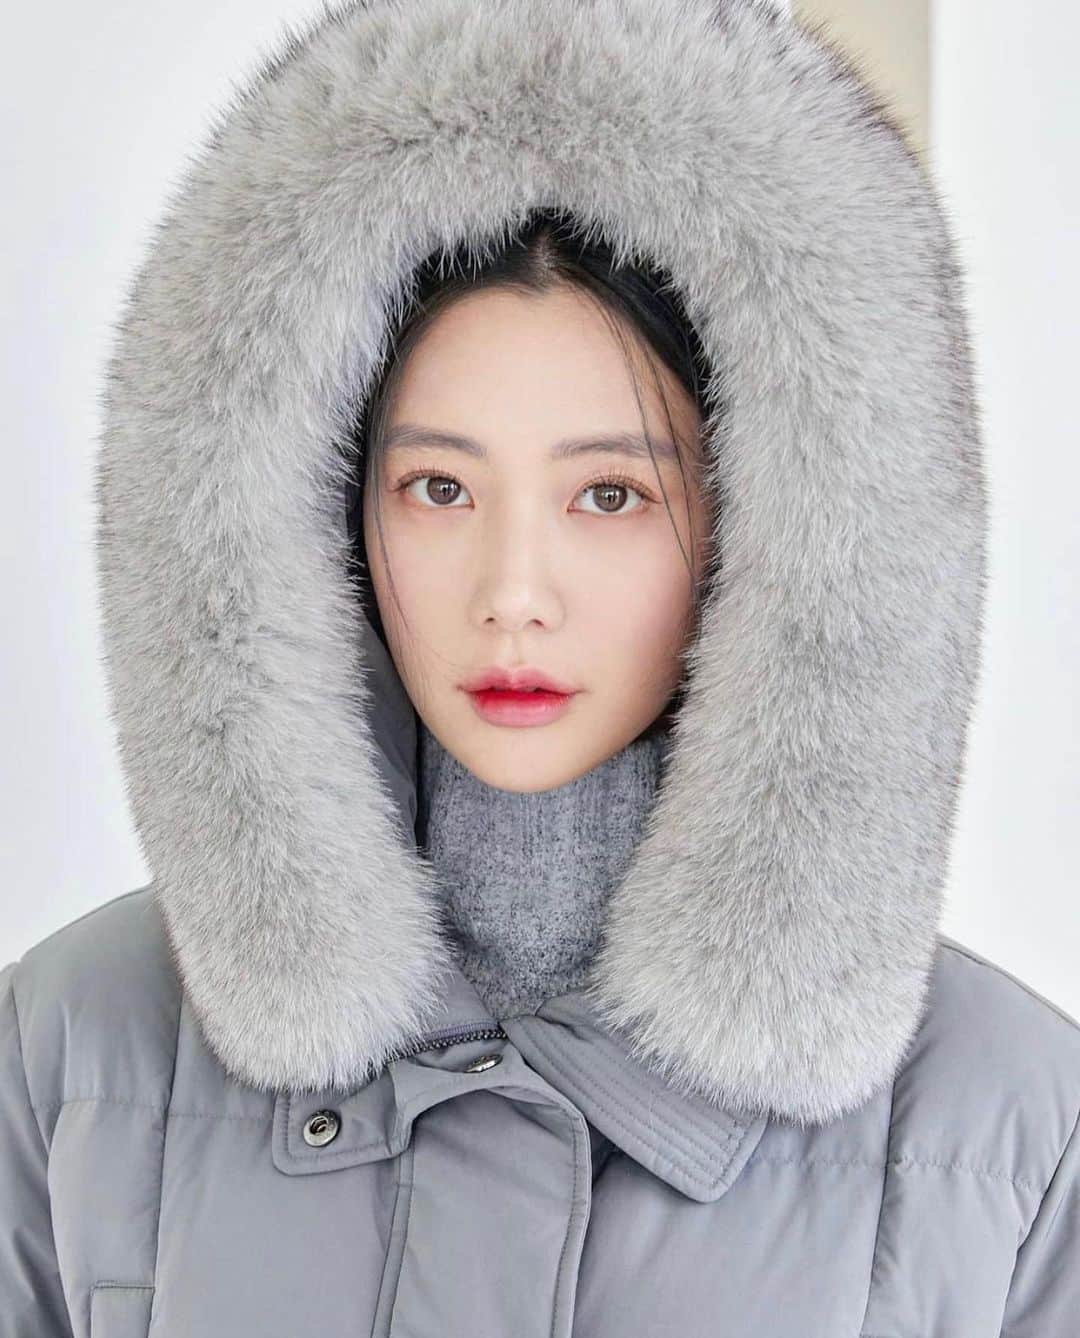 LIECOLLECTIONさんのインスタグラム写真 - (LIECOLLECTIONInstagram)「The Warmest Colab is Back! LIE x Clara x Hyundai Limited Edition Down Coat Available Now - DM for More Details .⠀⠀⠀⠀⠀⠀⠀⠀⠀⠀⠀⠀⠀⠀⠀⠀⠀⠀ .⠀⠀⠀⠀⠀⠀⠀⠀⠀⠀⠀⠀⠀⠀⠀⠀⠀⠀ .⠀⠀⠀⠀⠀⠀⠀⠀⠀⠀⠀⠀⠀⠀⠀⠀⠀⠀ .⠀⠀⠀⠀⠀⠀⠀⠀⠀⠀⠀⠀⠀⠀⠀⠀⠀⠀ .⠀⠀⠀⠀⠀⠀⠀⠀⠀⠀⠀⠀⠀⠀⠀⠀⠀⠀ .⠀⠀⠀⠀⠀⠀⠀⠀⠀⠀⠀⠀⠀⠀⠀⠀⠀⠀ .⠀⠀⠀⠀⠀⠀⠀⠀⠀⠀⠀⠀⠀⠀⠀⠀⠀⠀ #liecollection #이청청 #clara #limitededition #collaboration #wintercoat #hyundaidepartmentstore #downjacket #shopnow #newarrivals」11月12日 8時43分 - liecollection_